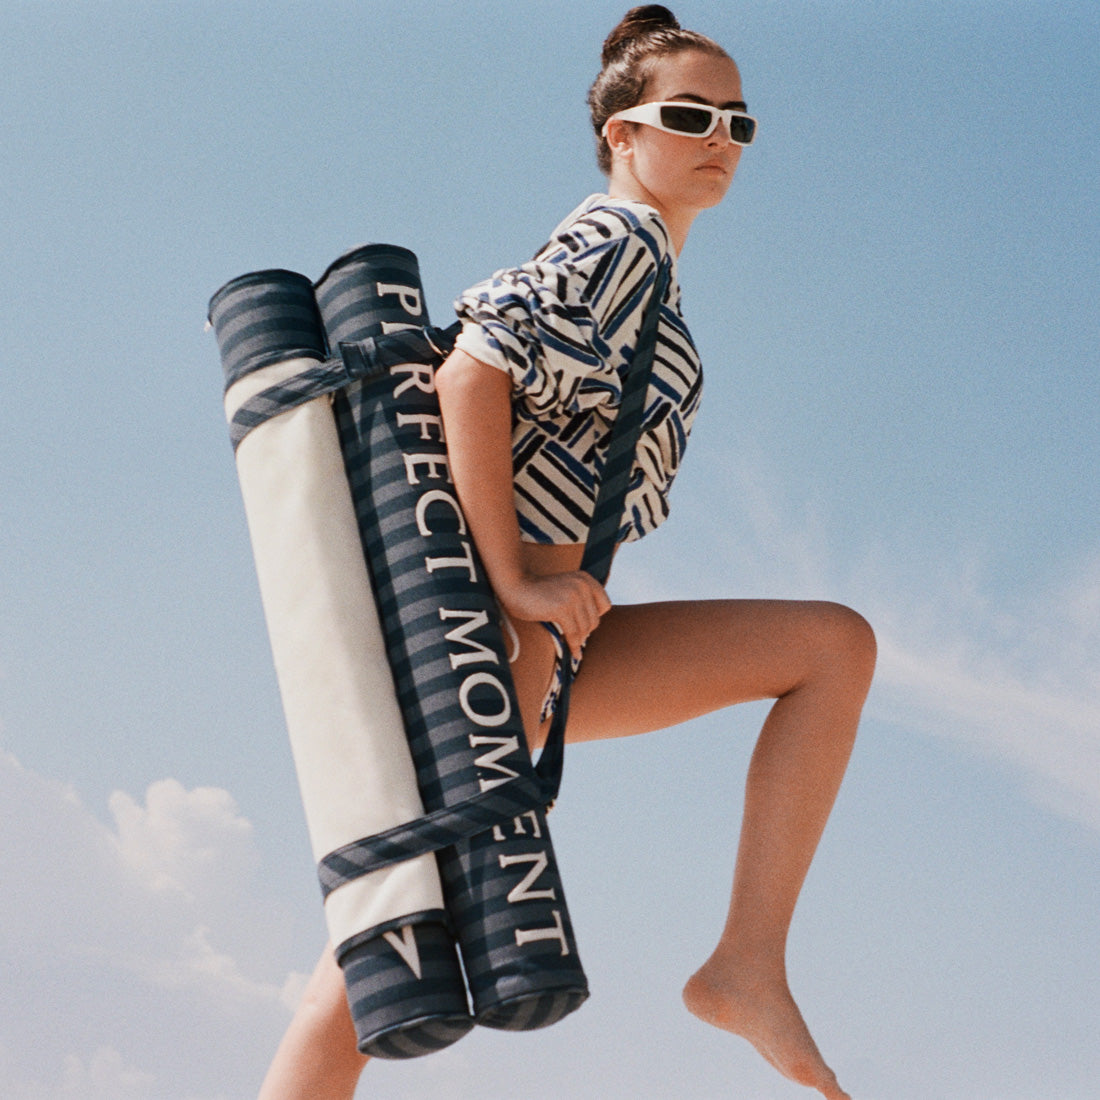 A women jumping across the sky with a luxury pool float on her back.